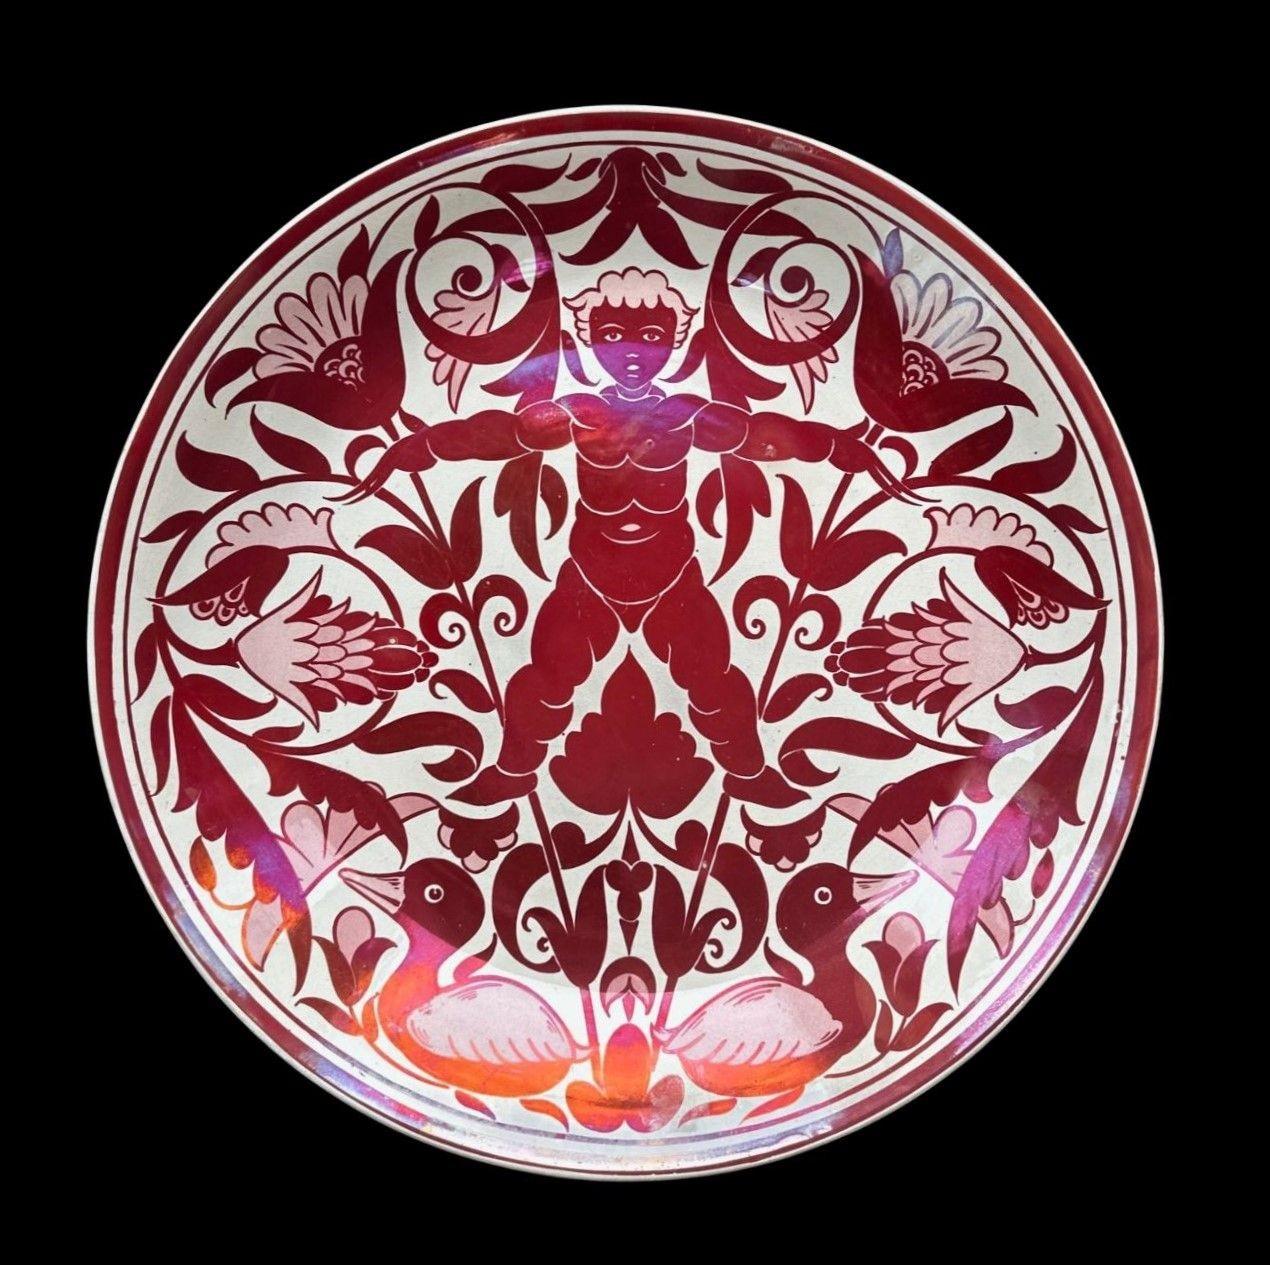 5446
William De Morgan Charger with a Good Ruby Lustre Firing.
Decorated with a Naked Boy, Ducks and Flowers by Fred Passenger
Several light and fine scratches to the surface
35.5cm wide
Circa 1890
Design featured in “The Designs of William De